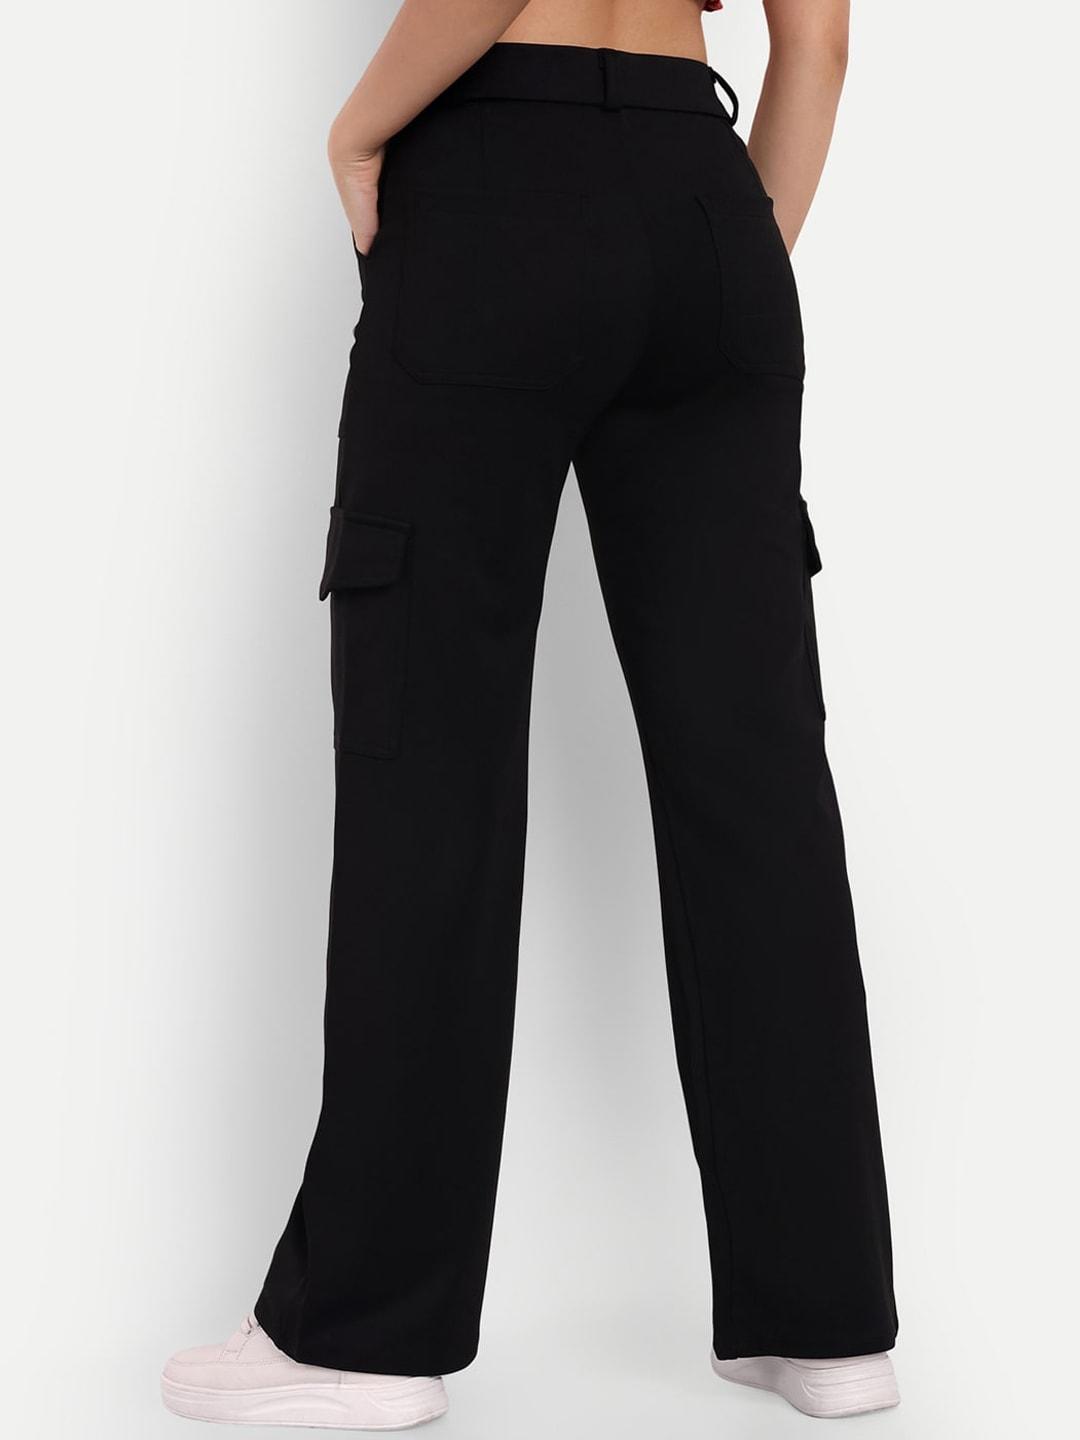 next-one-women-black-smart-loose-fit-high-rise-easy-wash-cargos-trousers